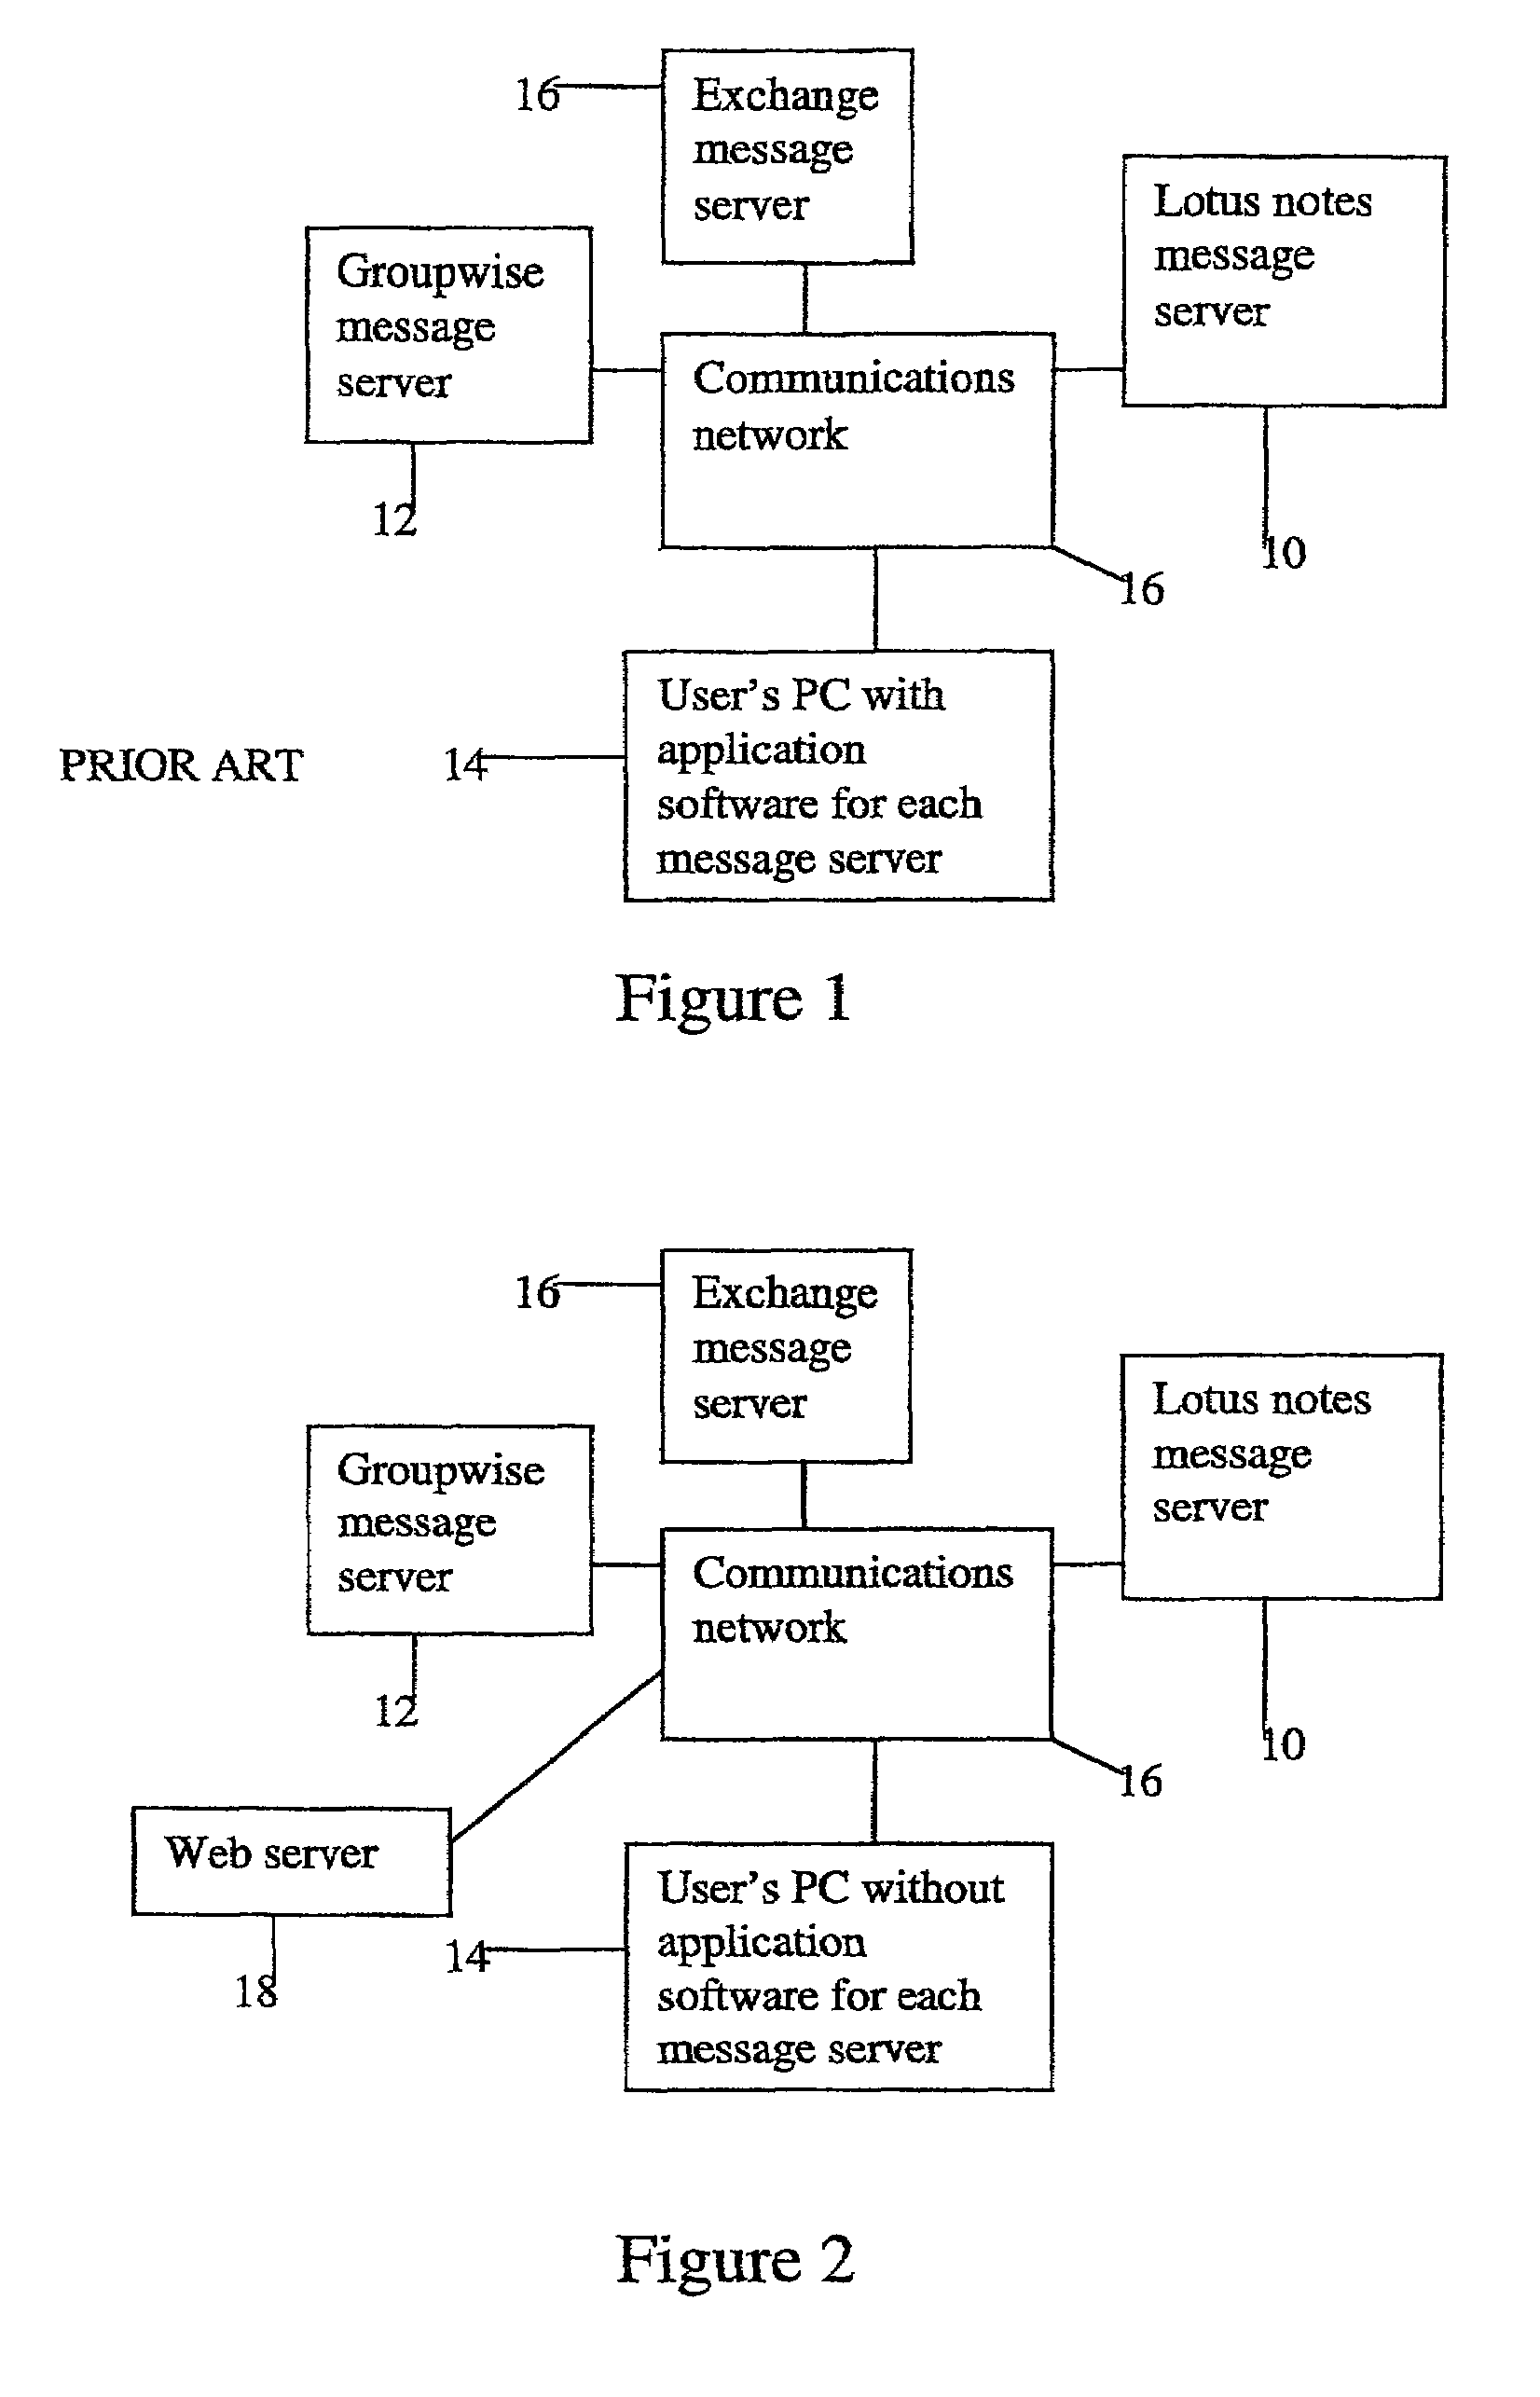 Providing access to a plurality of e-mail and voice message accounts from a single web-based interface